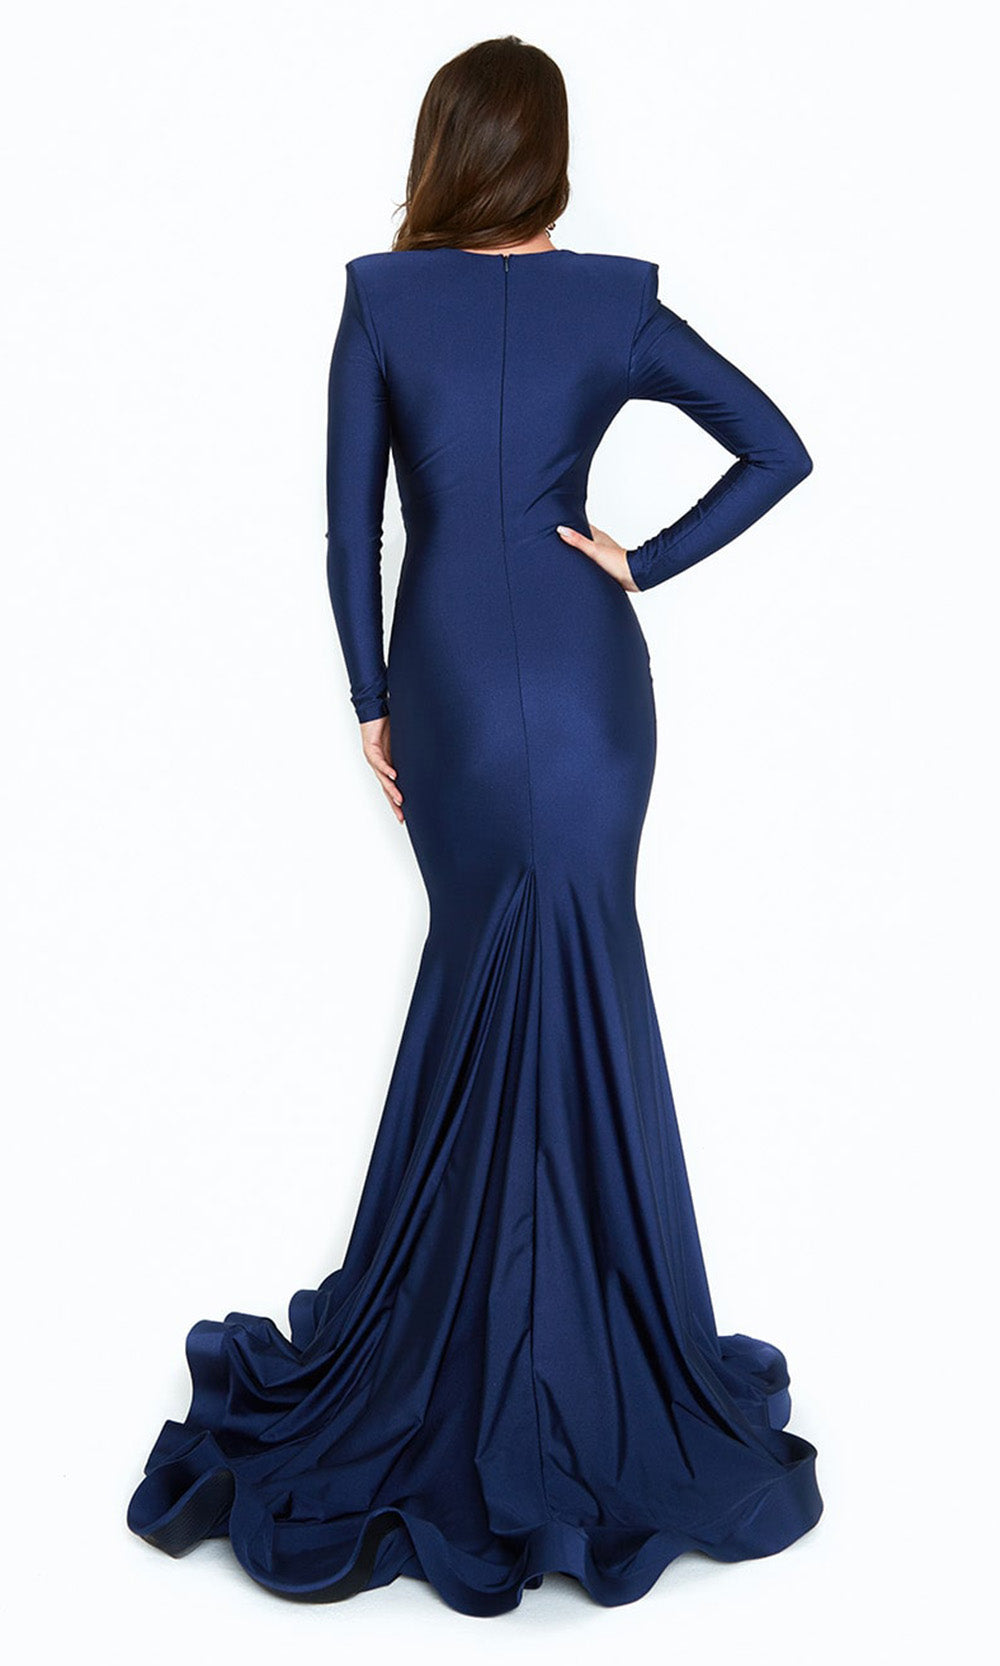 Atria - 6535H Plunging Formal Mermaid Gown In Black and Blue